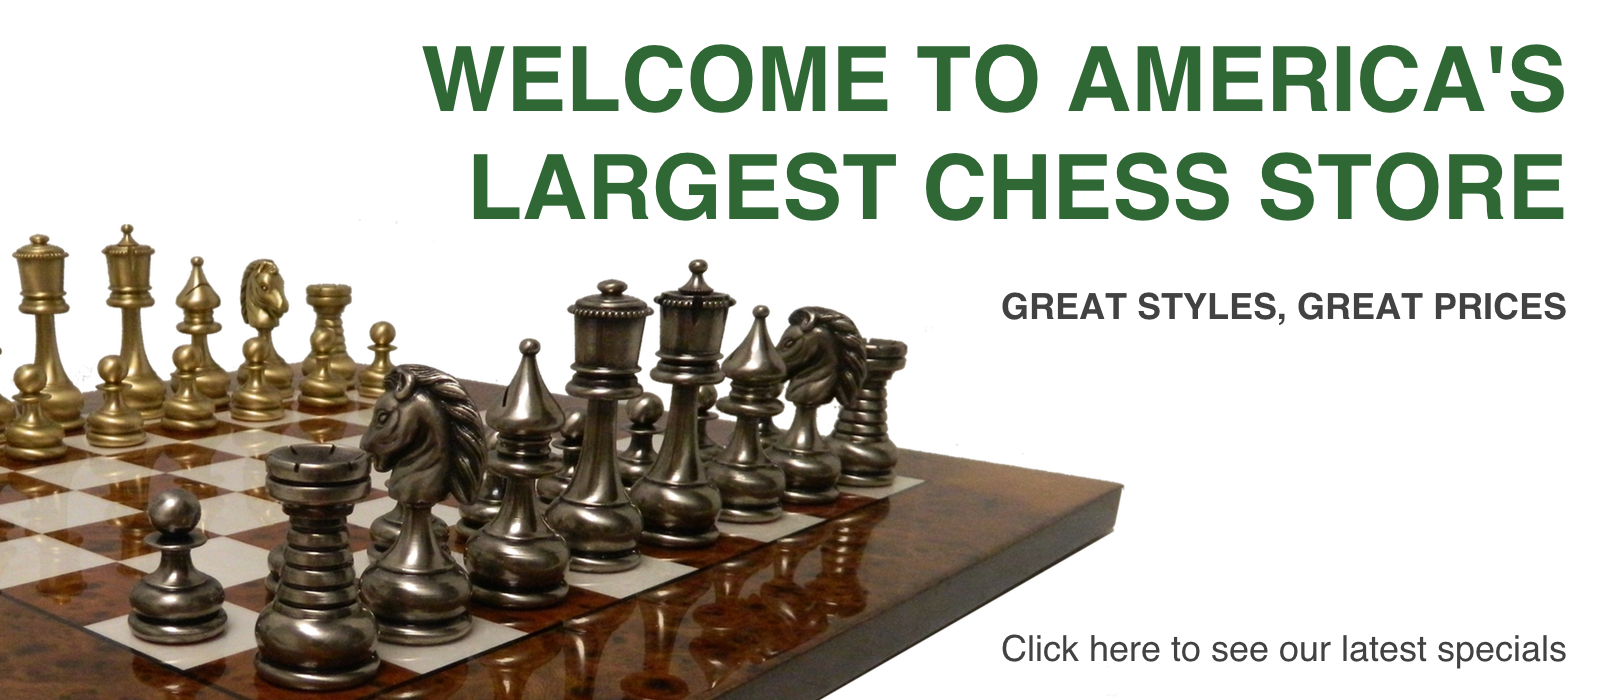 What are some special chess moves?